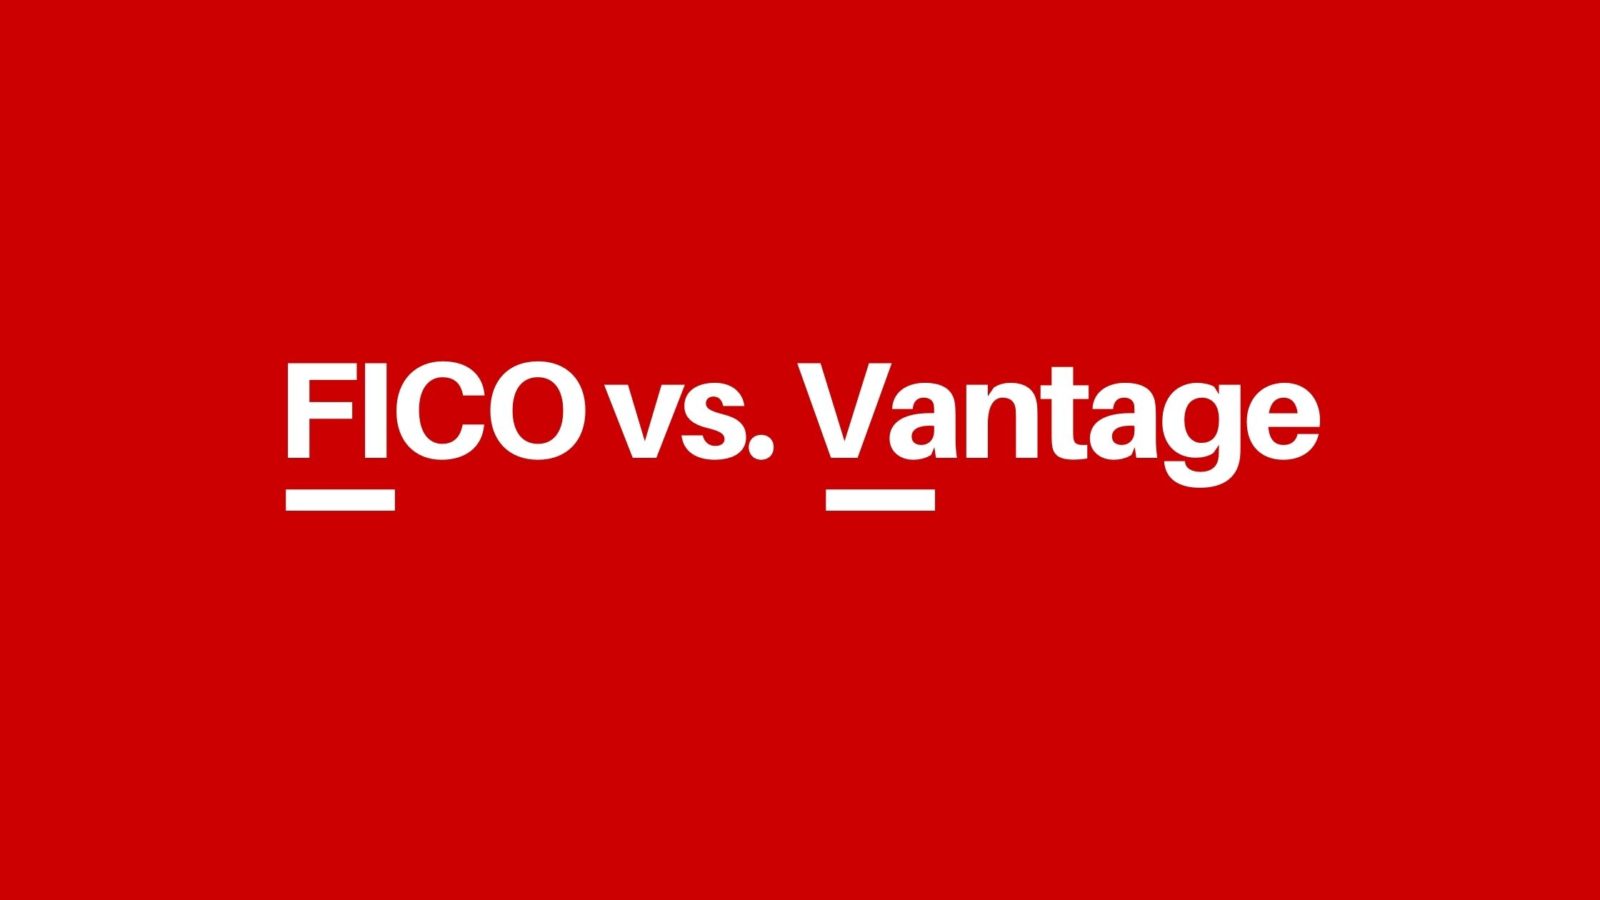 FICO vs. Vantage Score: What’s the Difference? 4